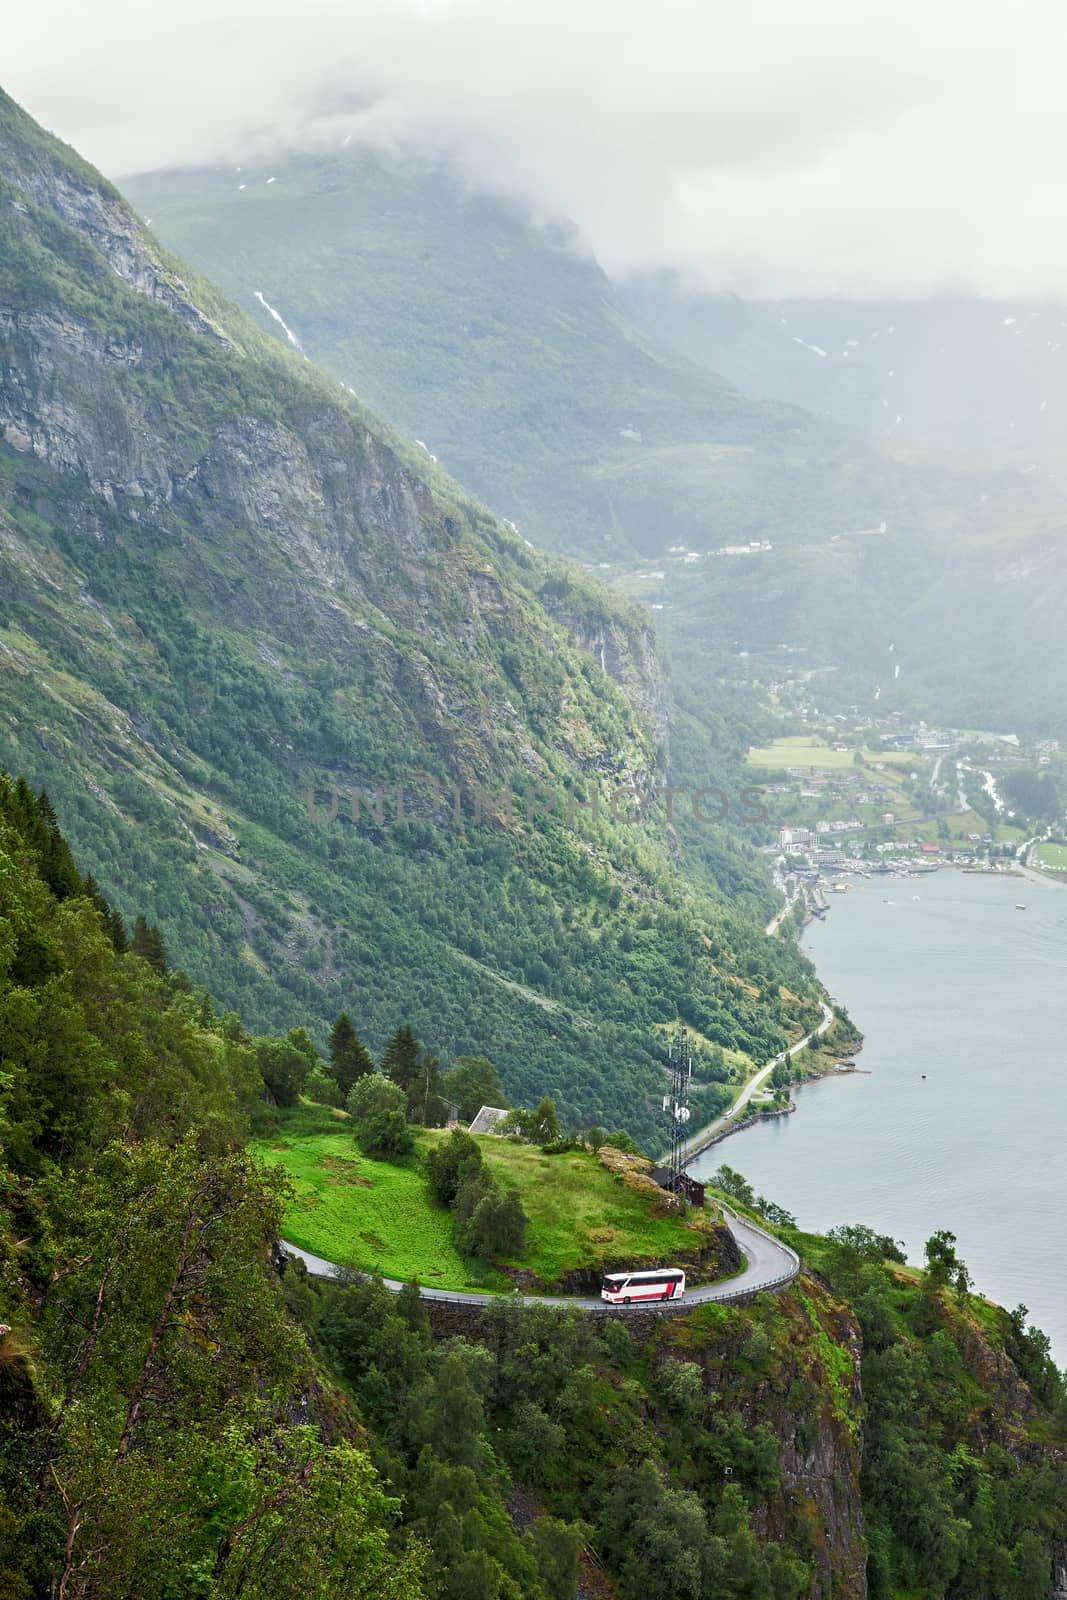 Geiranger seen from above in a cloudy day, Norway